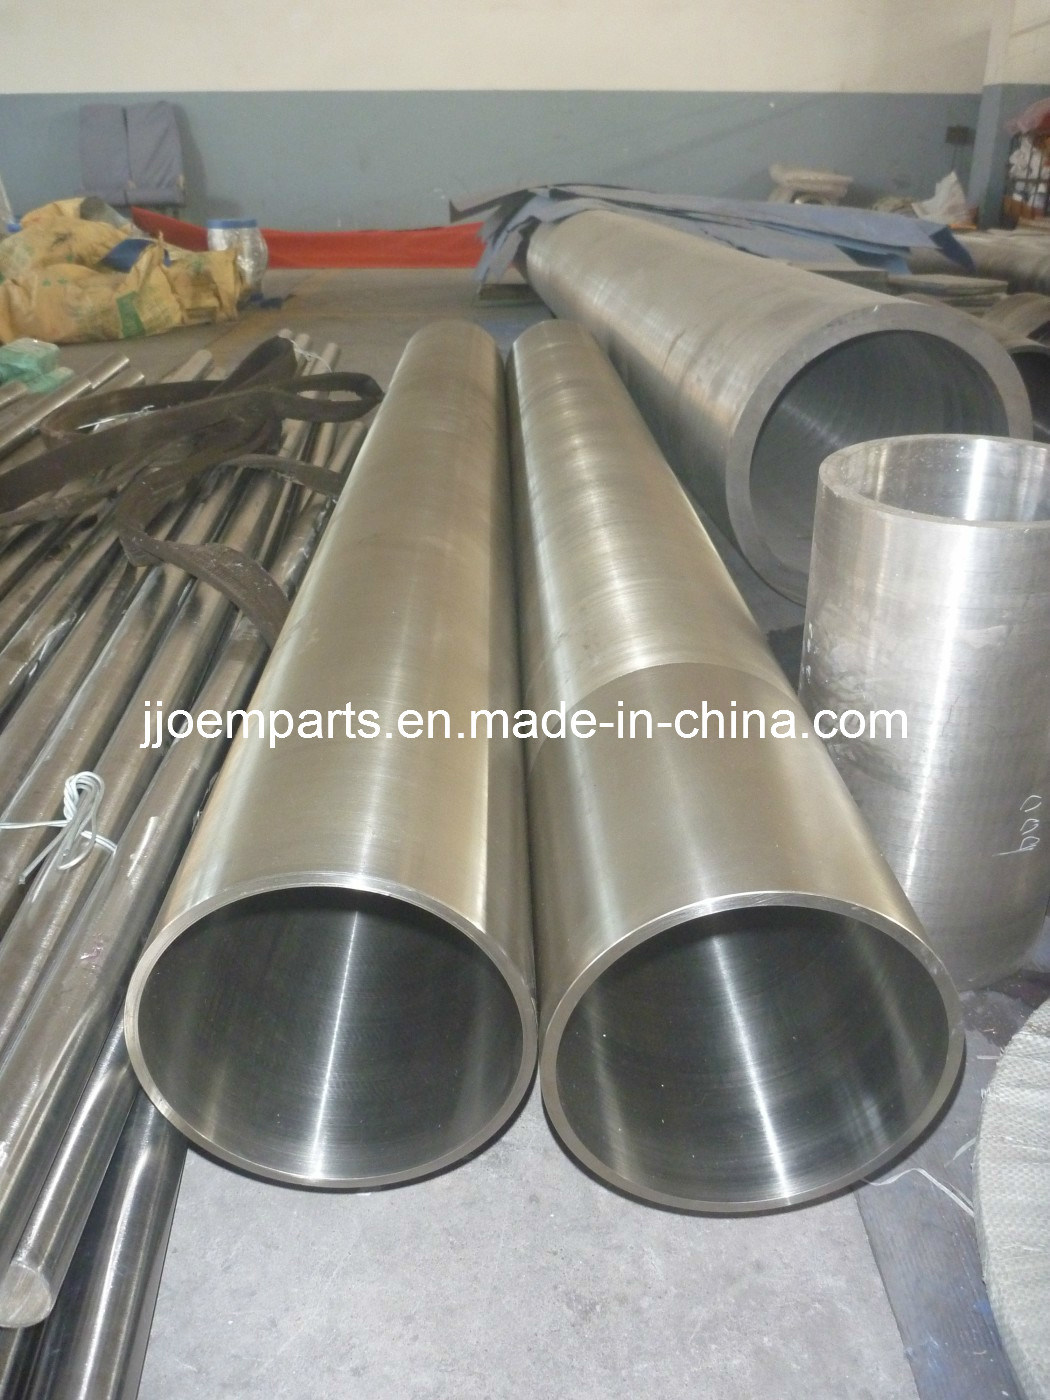 ASTM A508/A508M Cl. 2 /Cl. 3 Steel Forged Forging Tubes Pipes Piping tubings sleeves Bushes shells Cylinder barrels